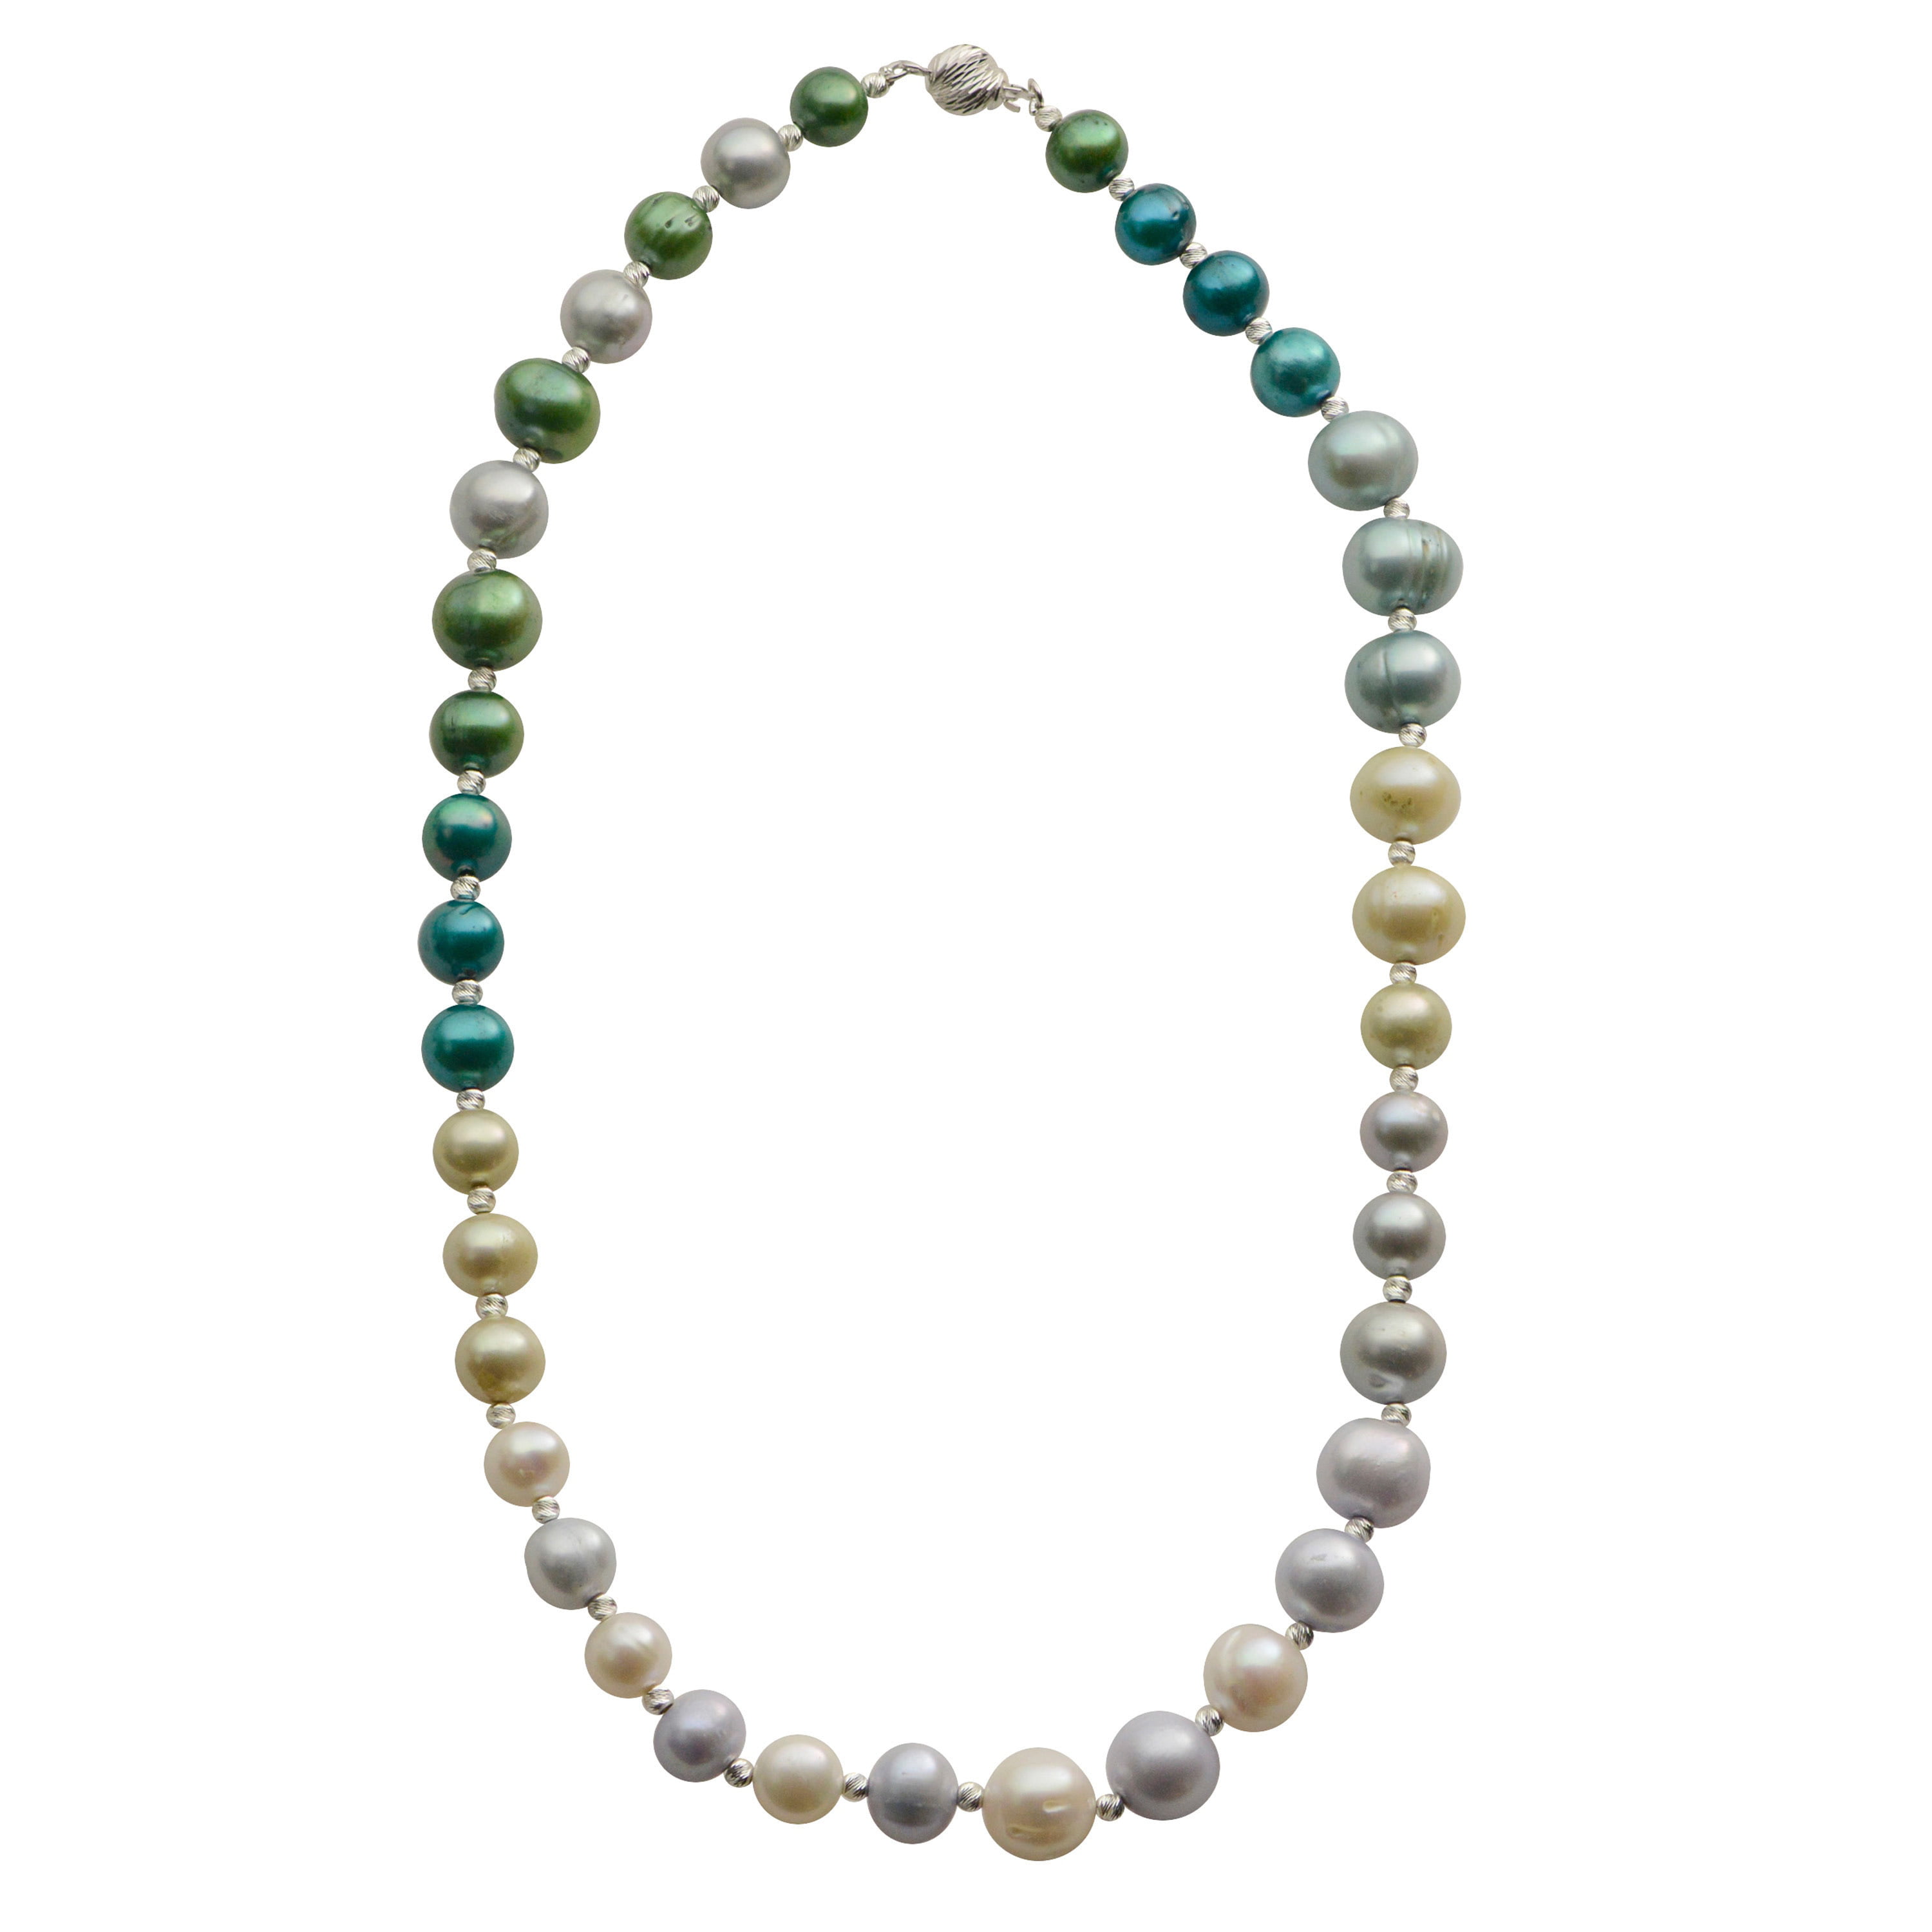 freshwater pearl green baroque 7-9mm necklace 36" wholesale bead nature gift